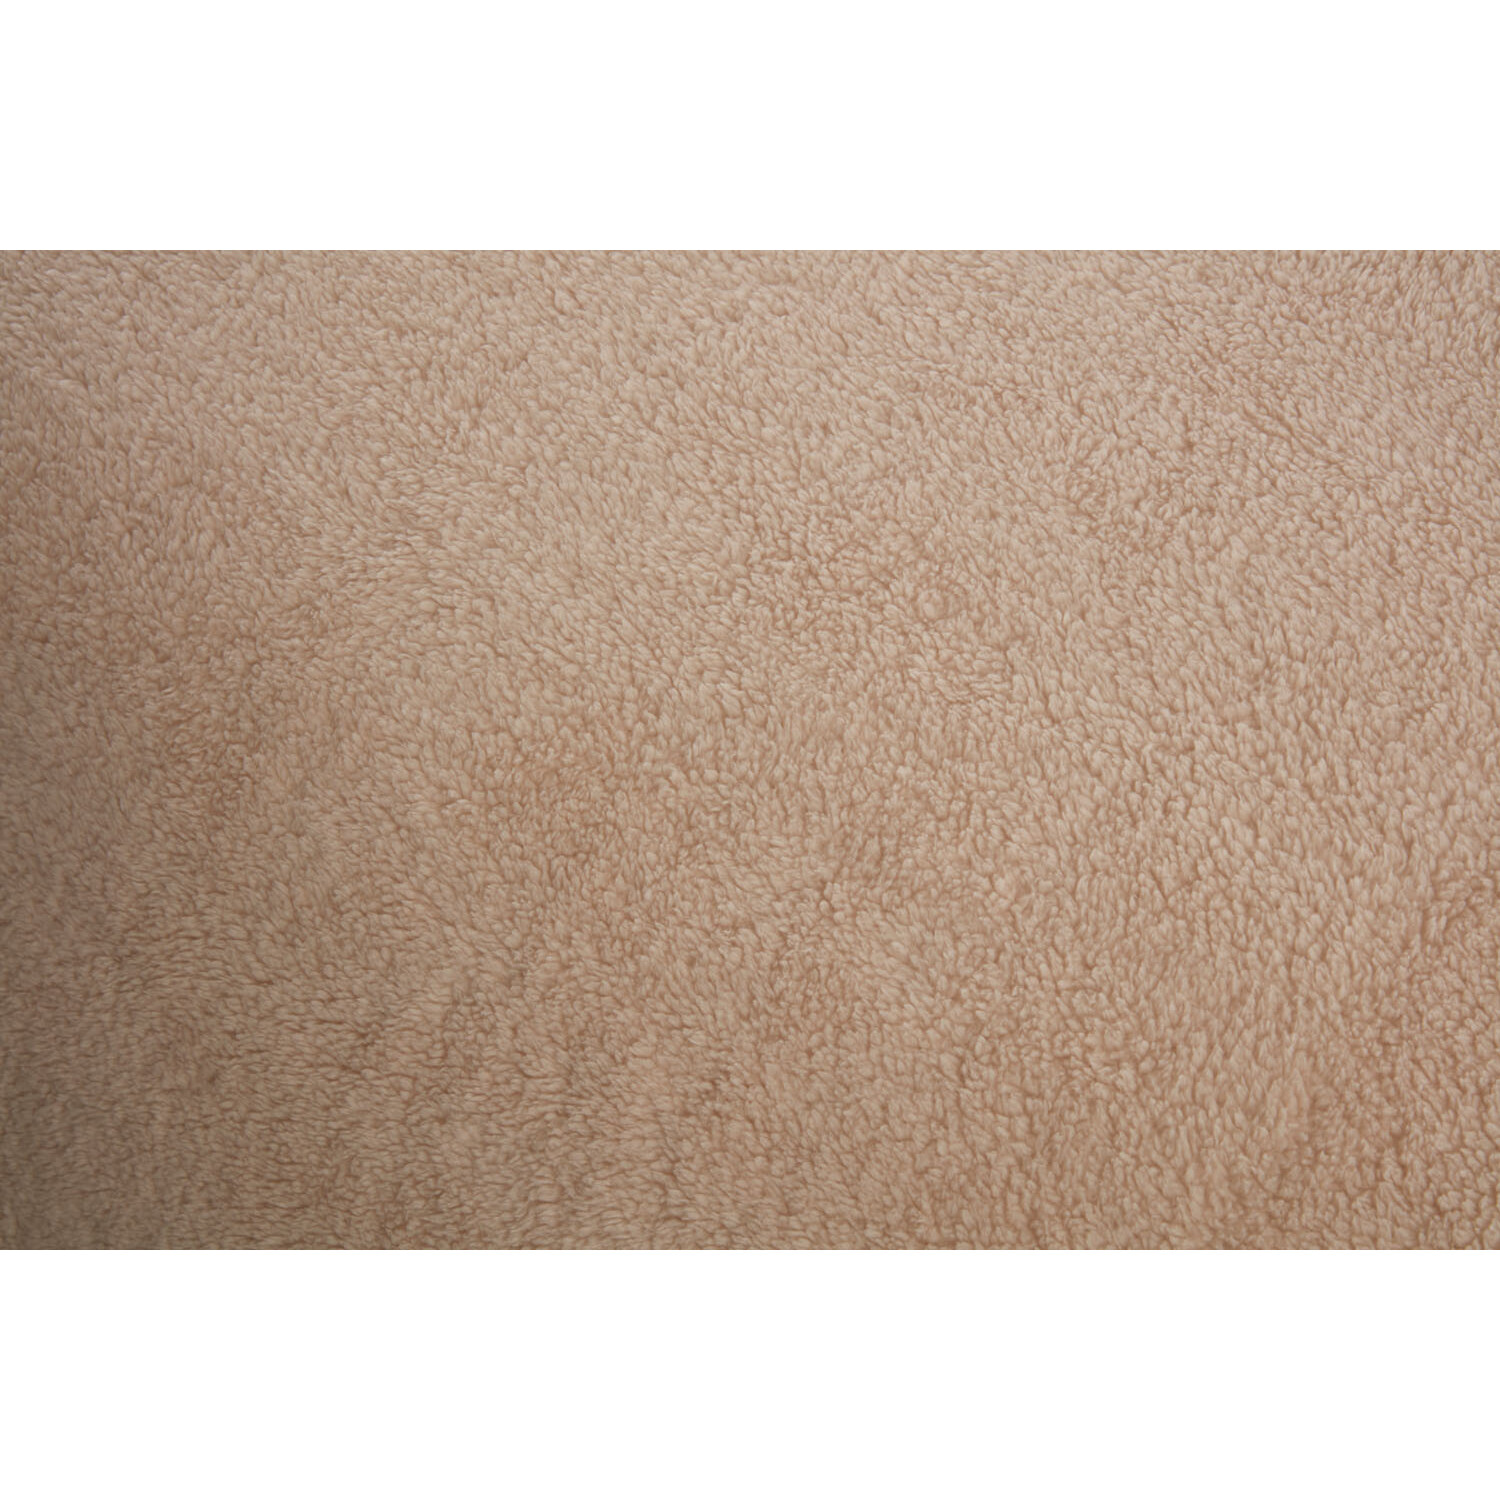 King Size Natural Teddy Fleece Fitted Sheet Image 2